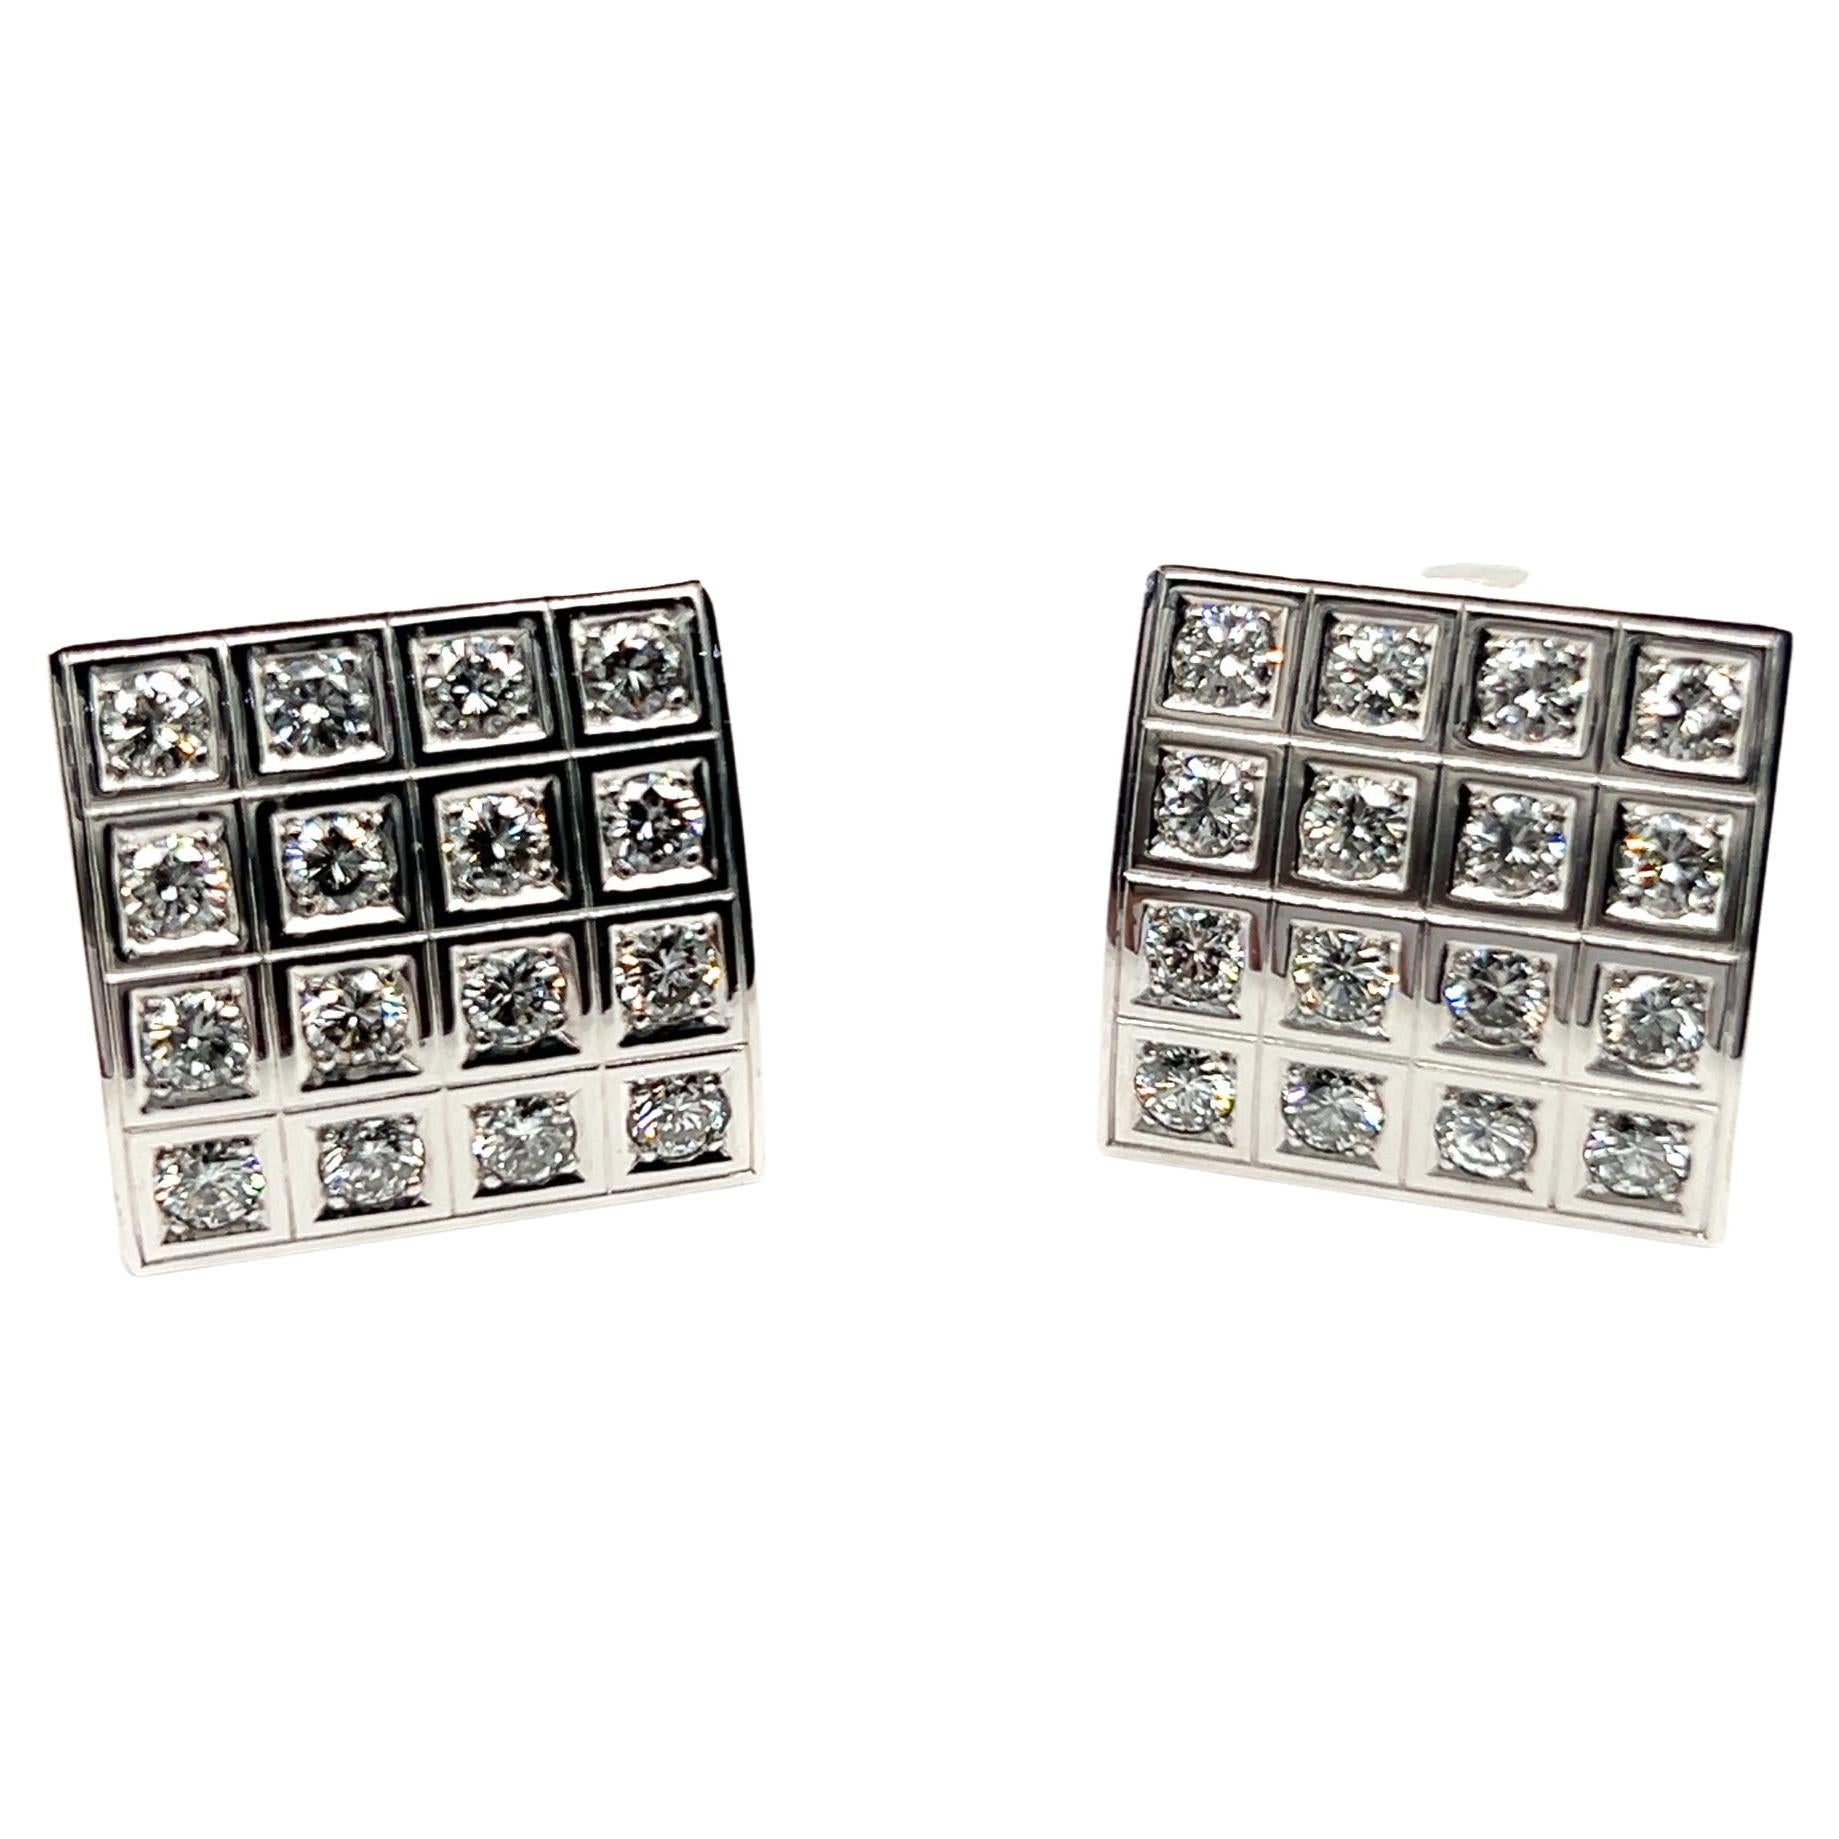  Bold Graphic Earrings with Diamonds in 18 Karat White Gold by Majo Fruithof For Sale